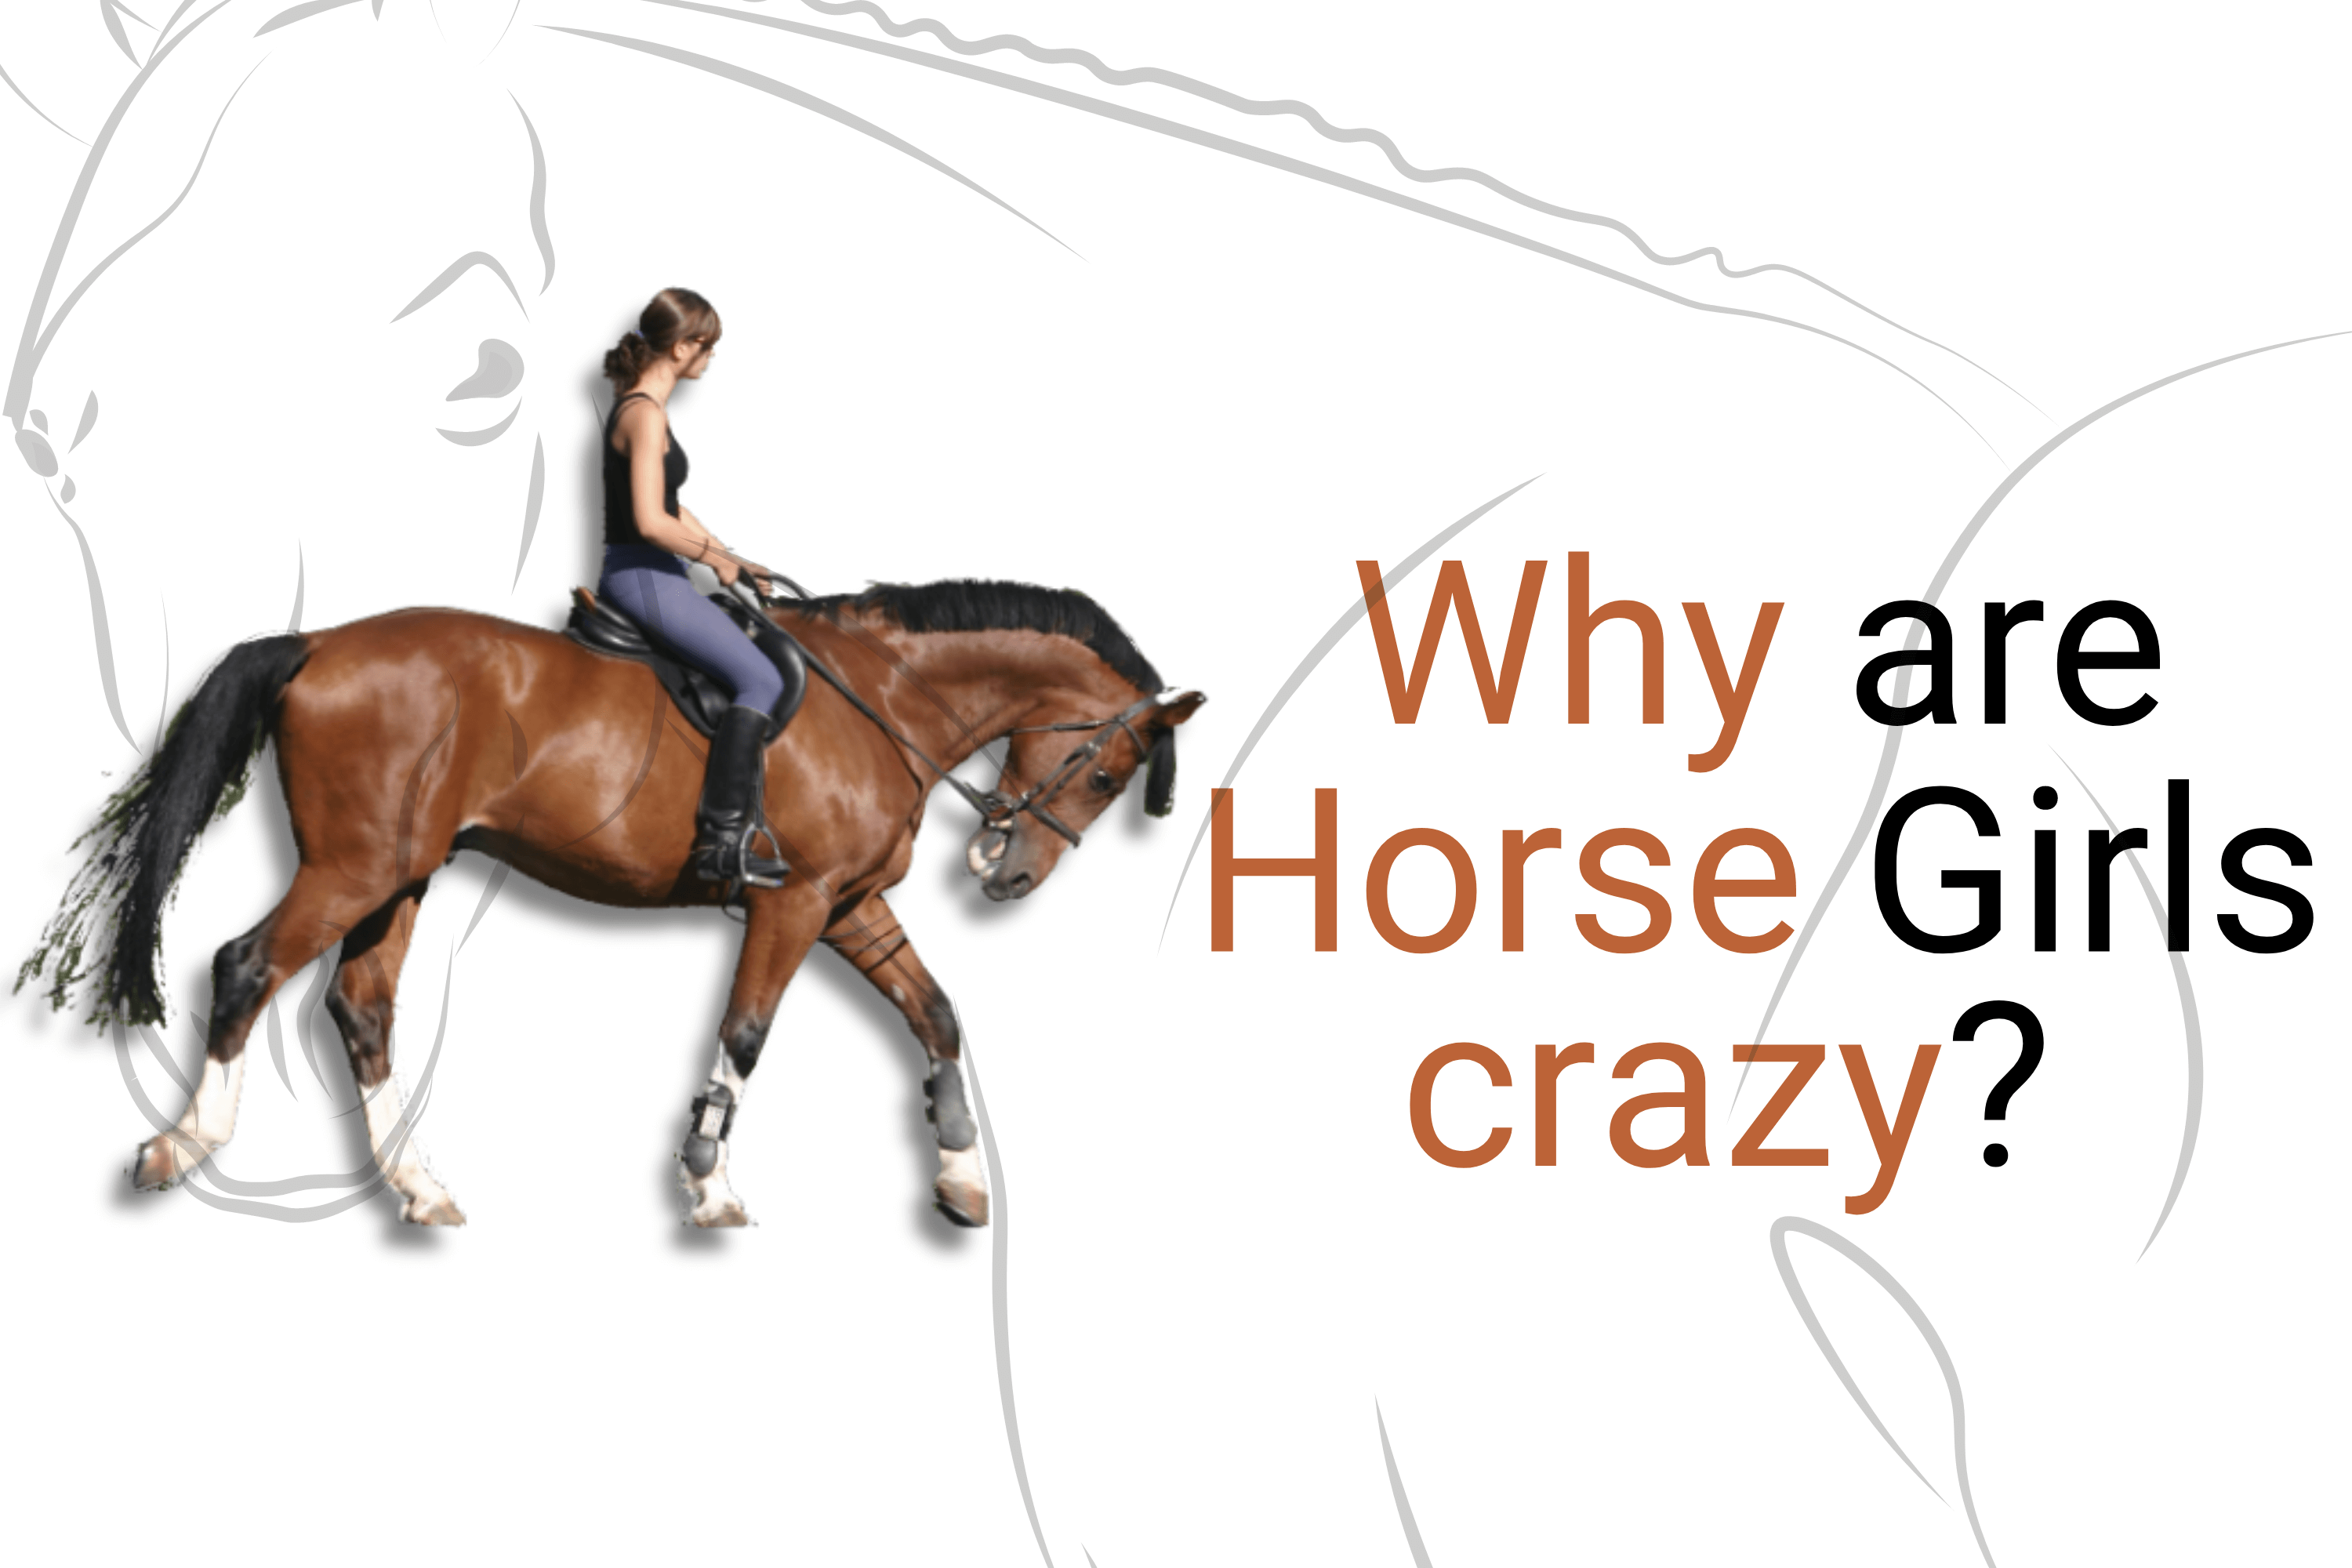 Why are horse girls crazy